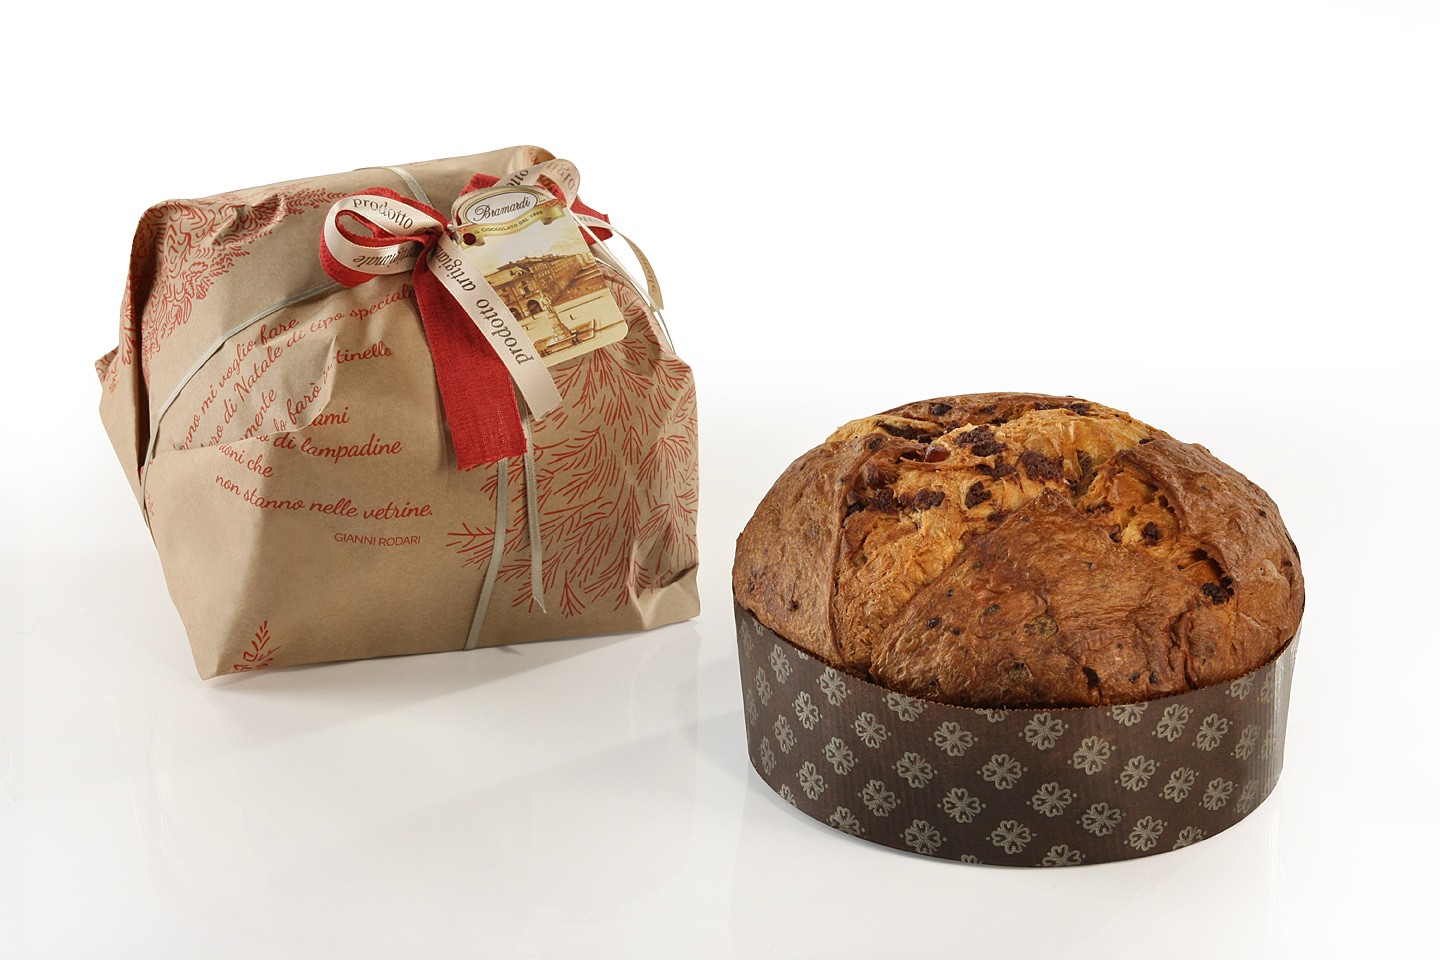 Chocolate Panettone with mother yeast and cooked in a wood oven